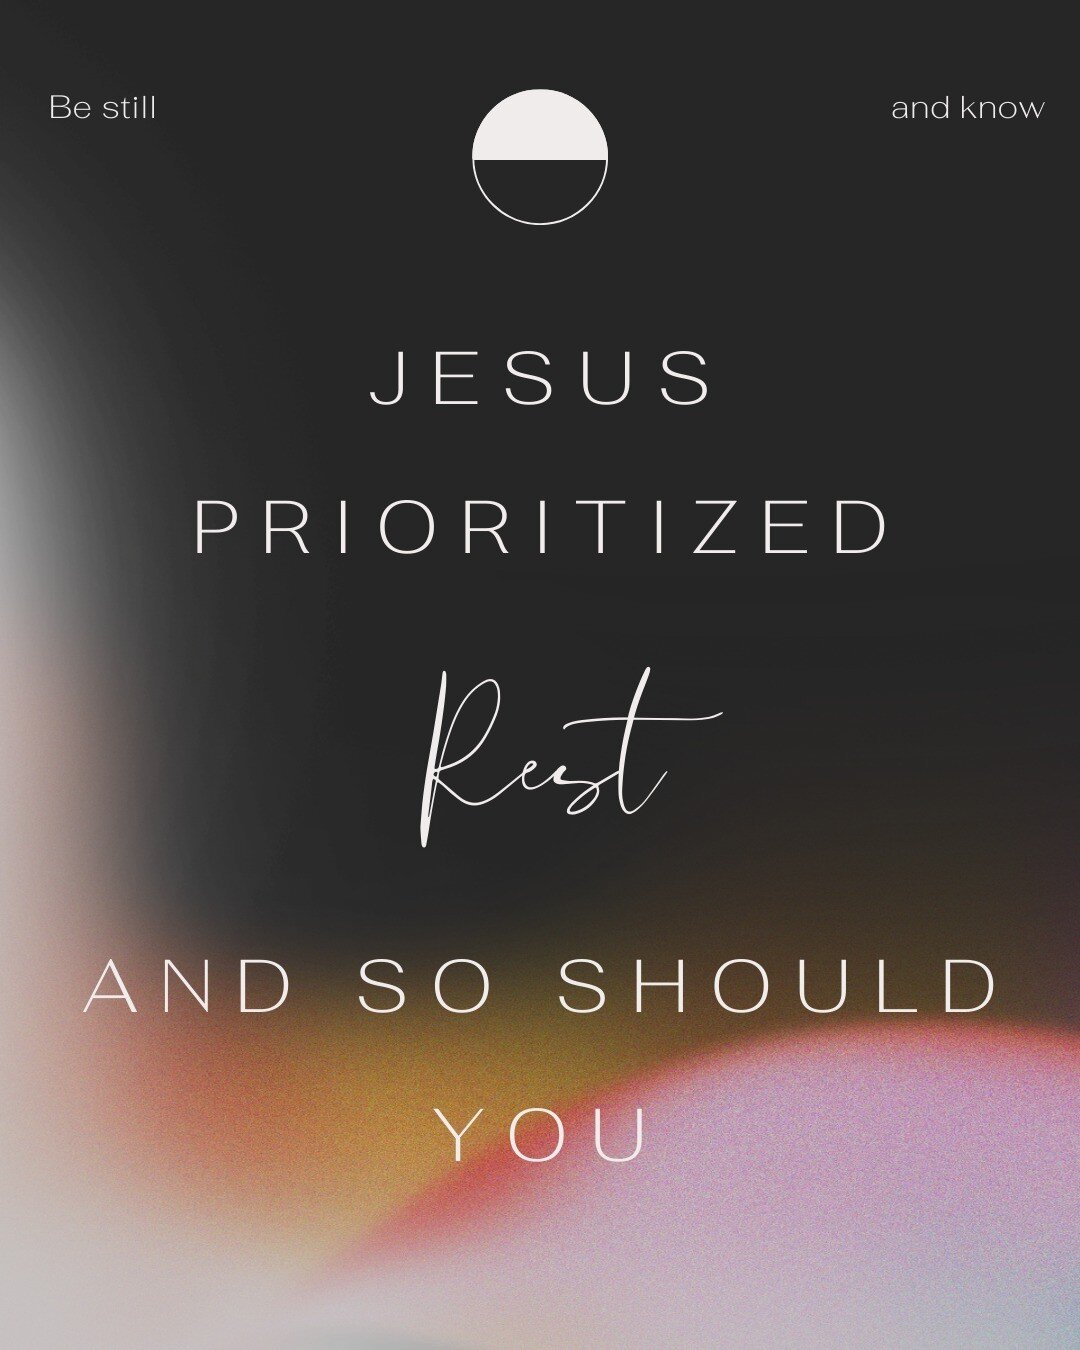 Jesus prioritized rest for himself and his disciples. He knew rest would keep them healthy and prepared for the mission ahead of them. Whatever kind of rest you need right now, I hope you'll give God the chance to take care of you this week as you fo